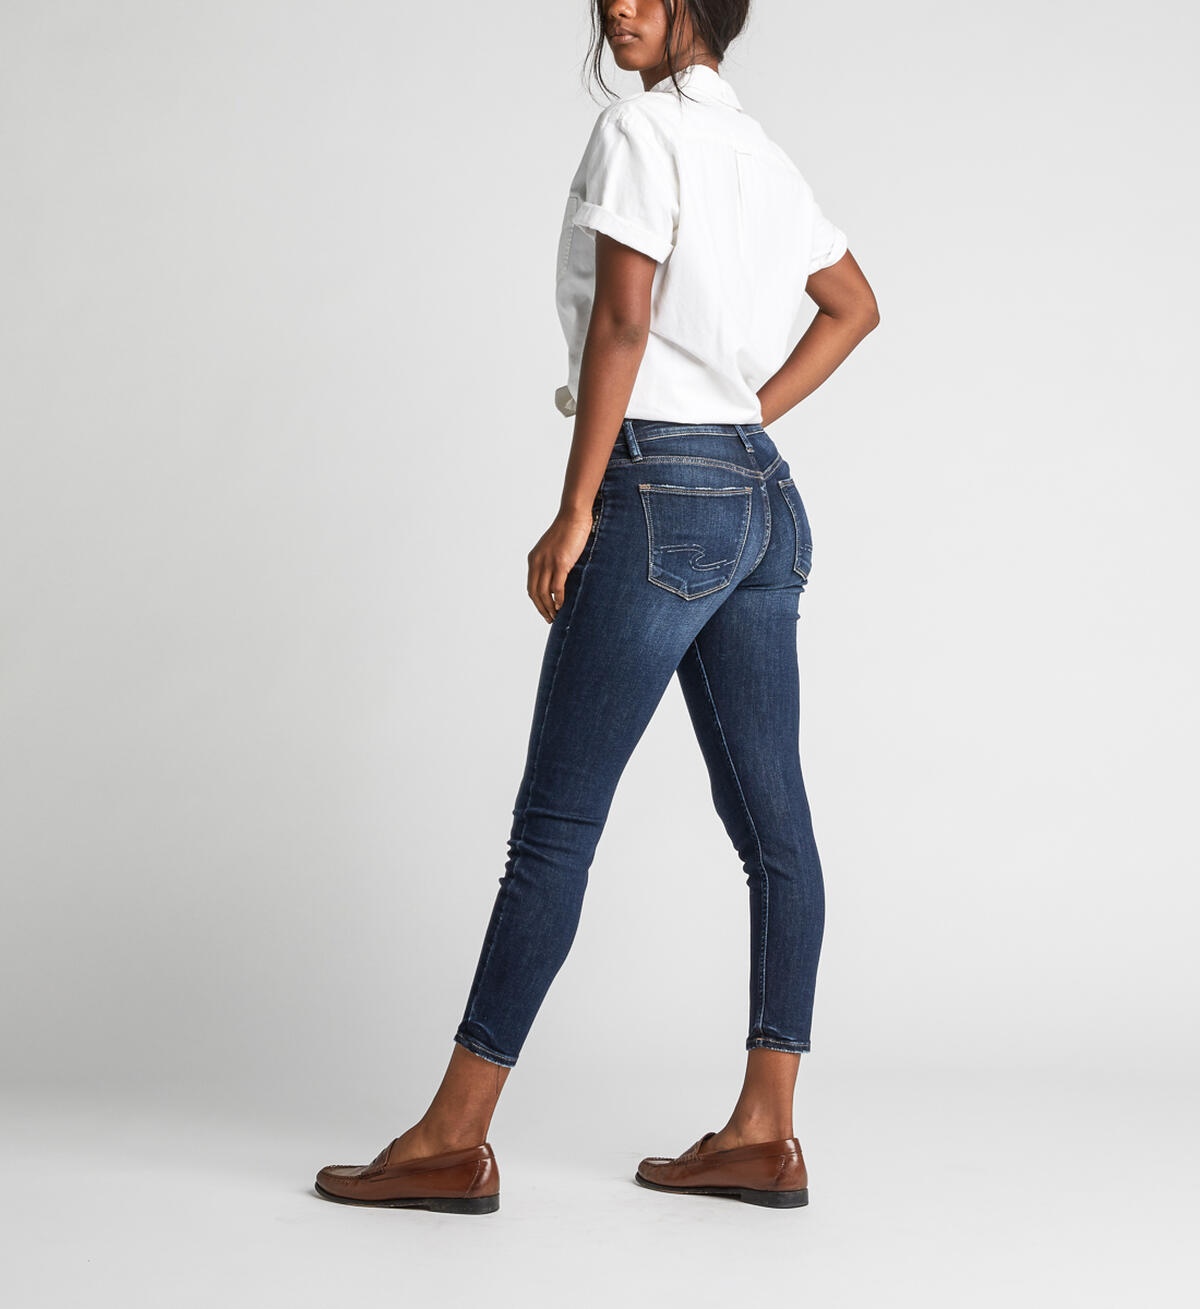 Avery High-Rise Curvy Skinny Crop Jeans, , hi-res image number 2